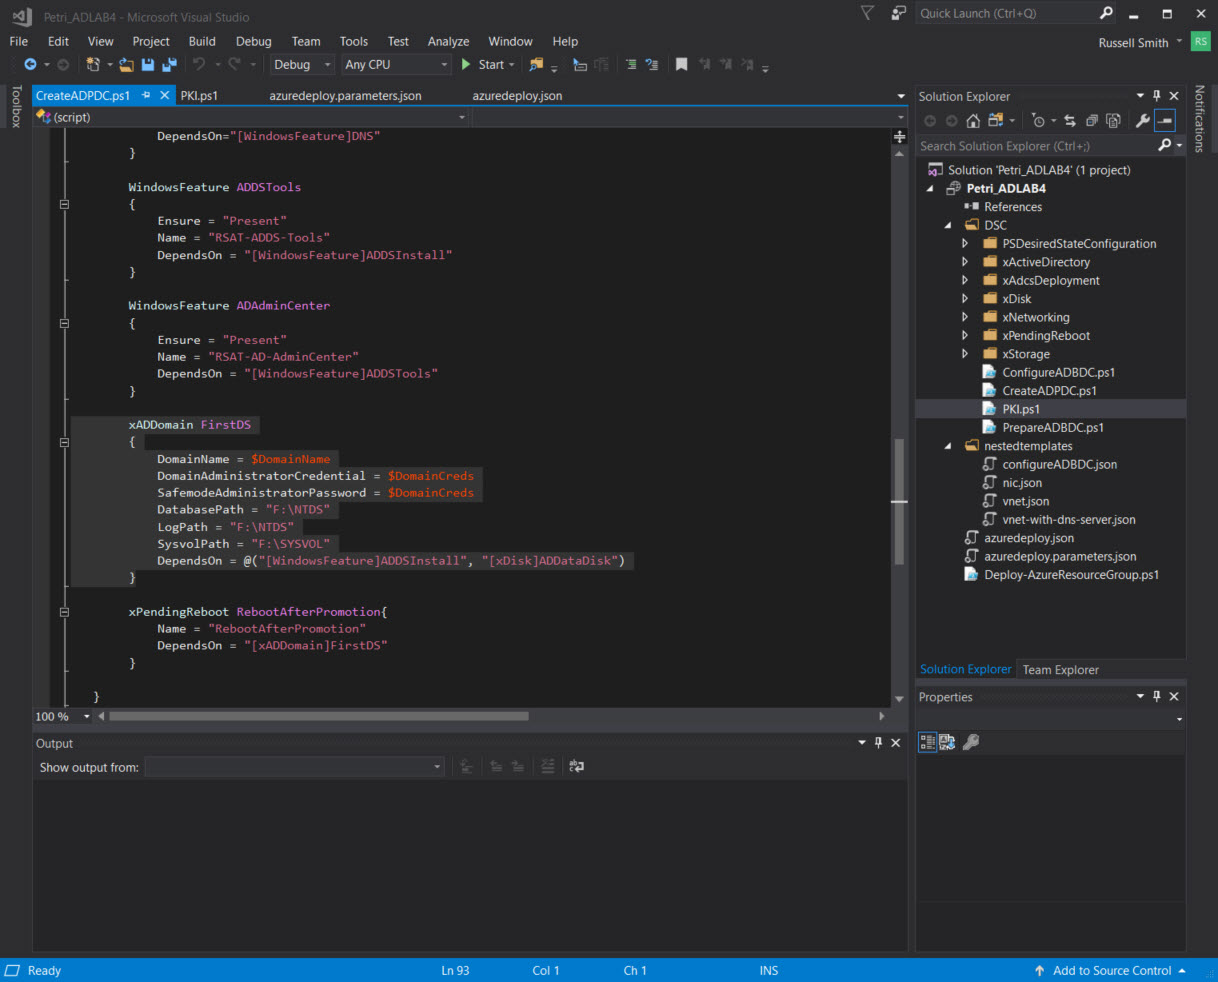 Infrastructure-as-Code PowerShell DSC file in Visual Studio (Image Credit: Russell Smith)